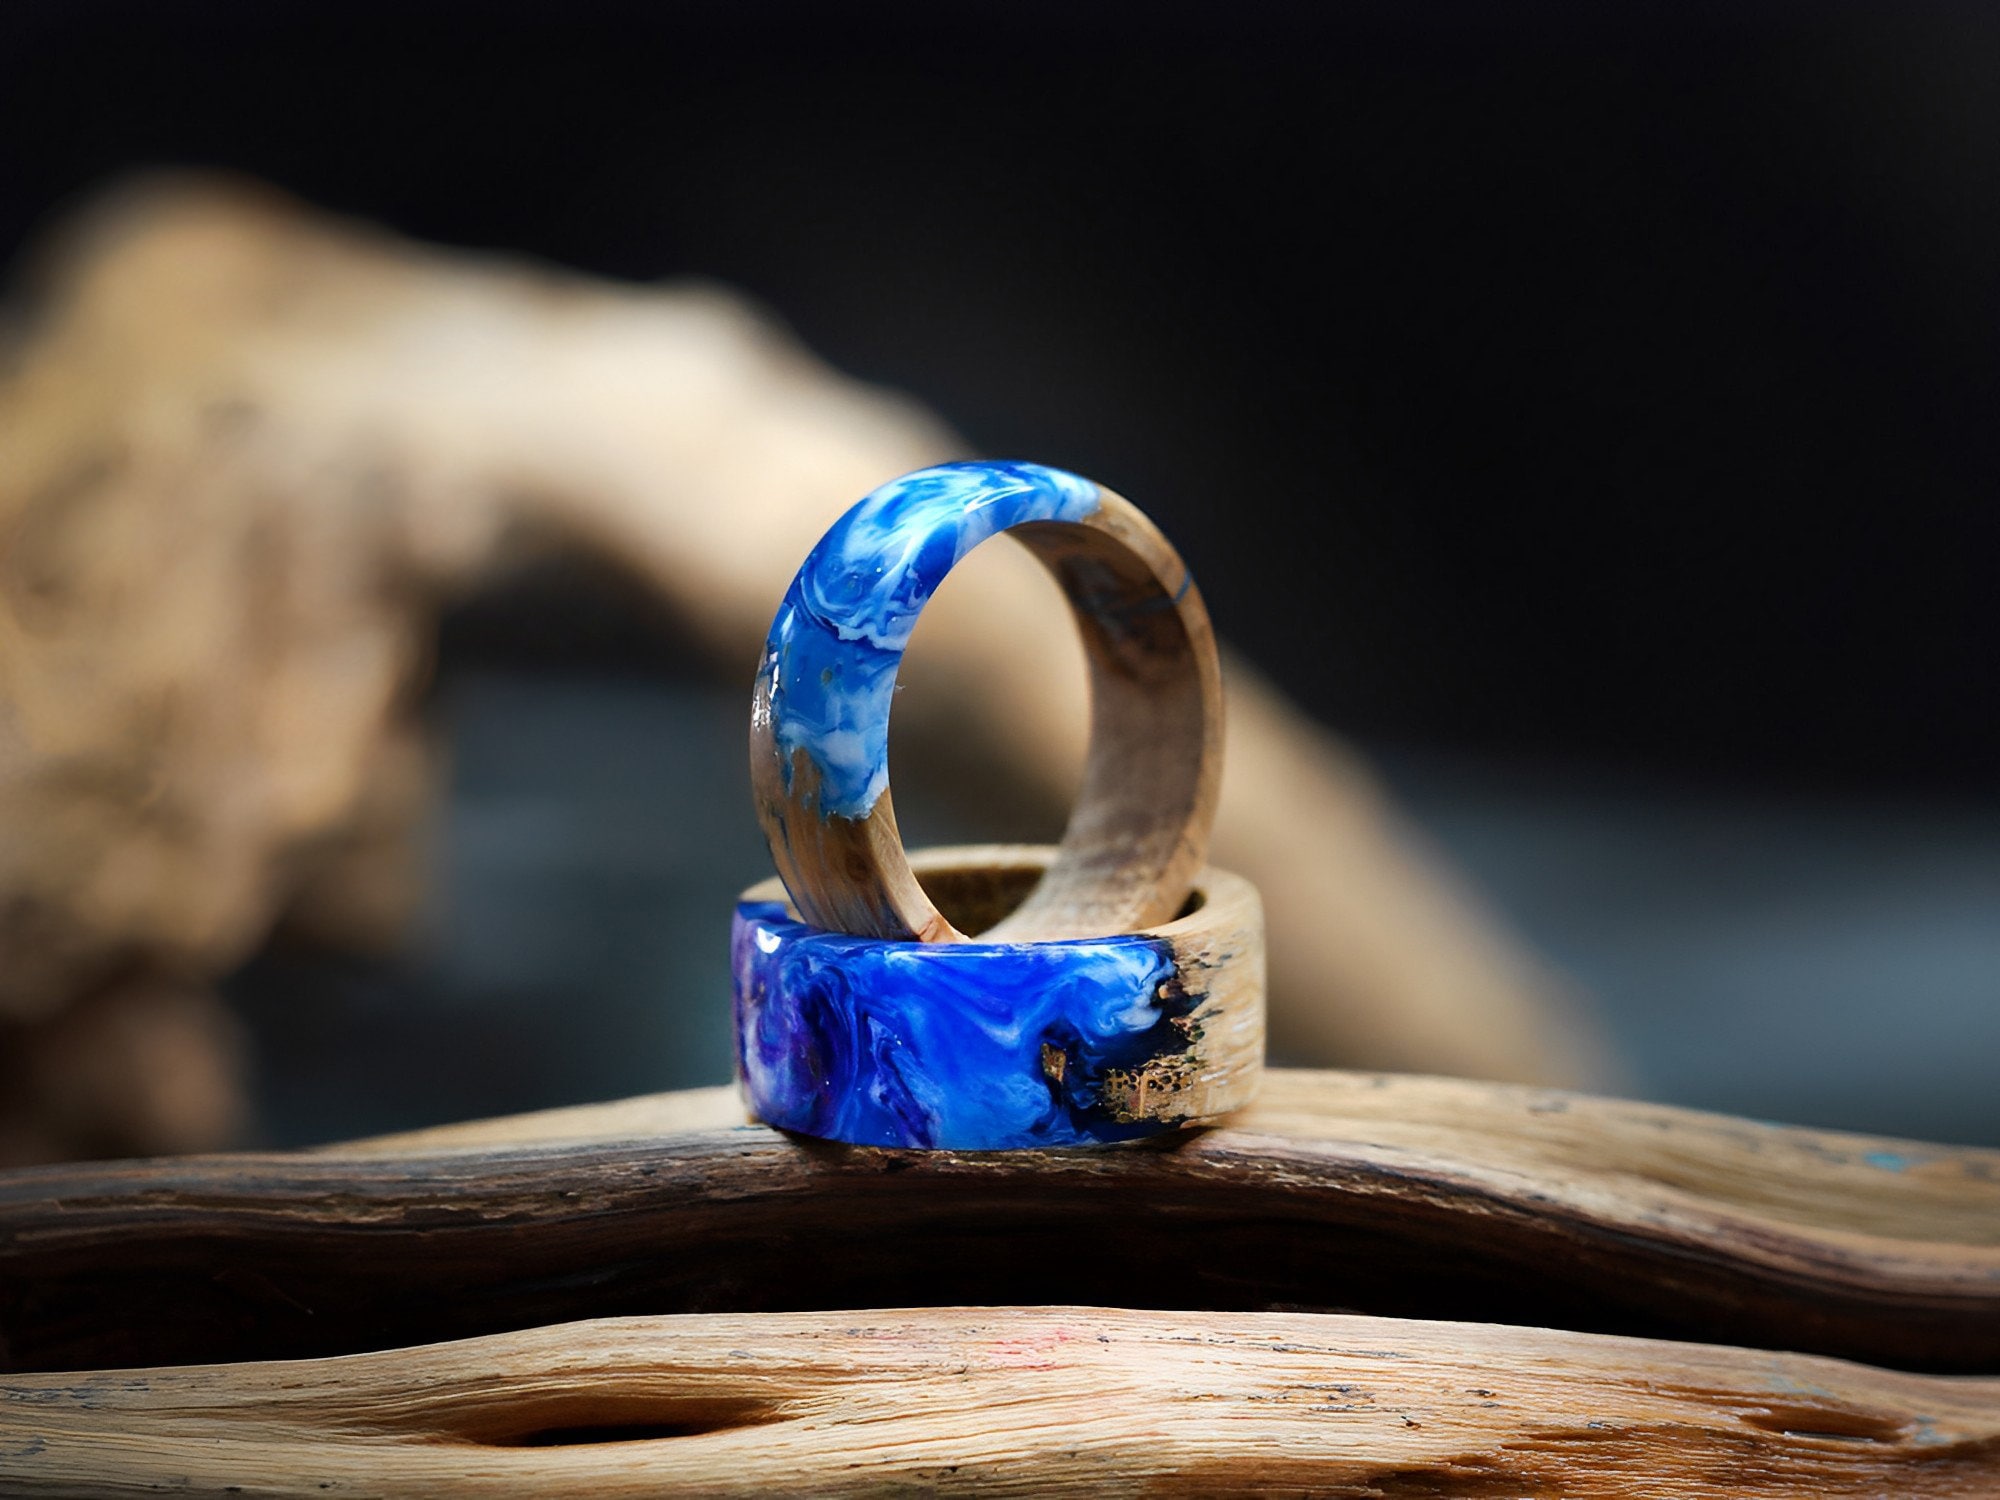 How to Make a Resin Ring - FeltMagnet